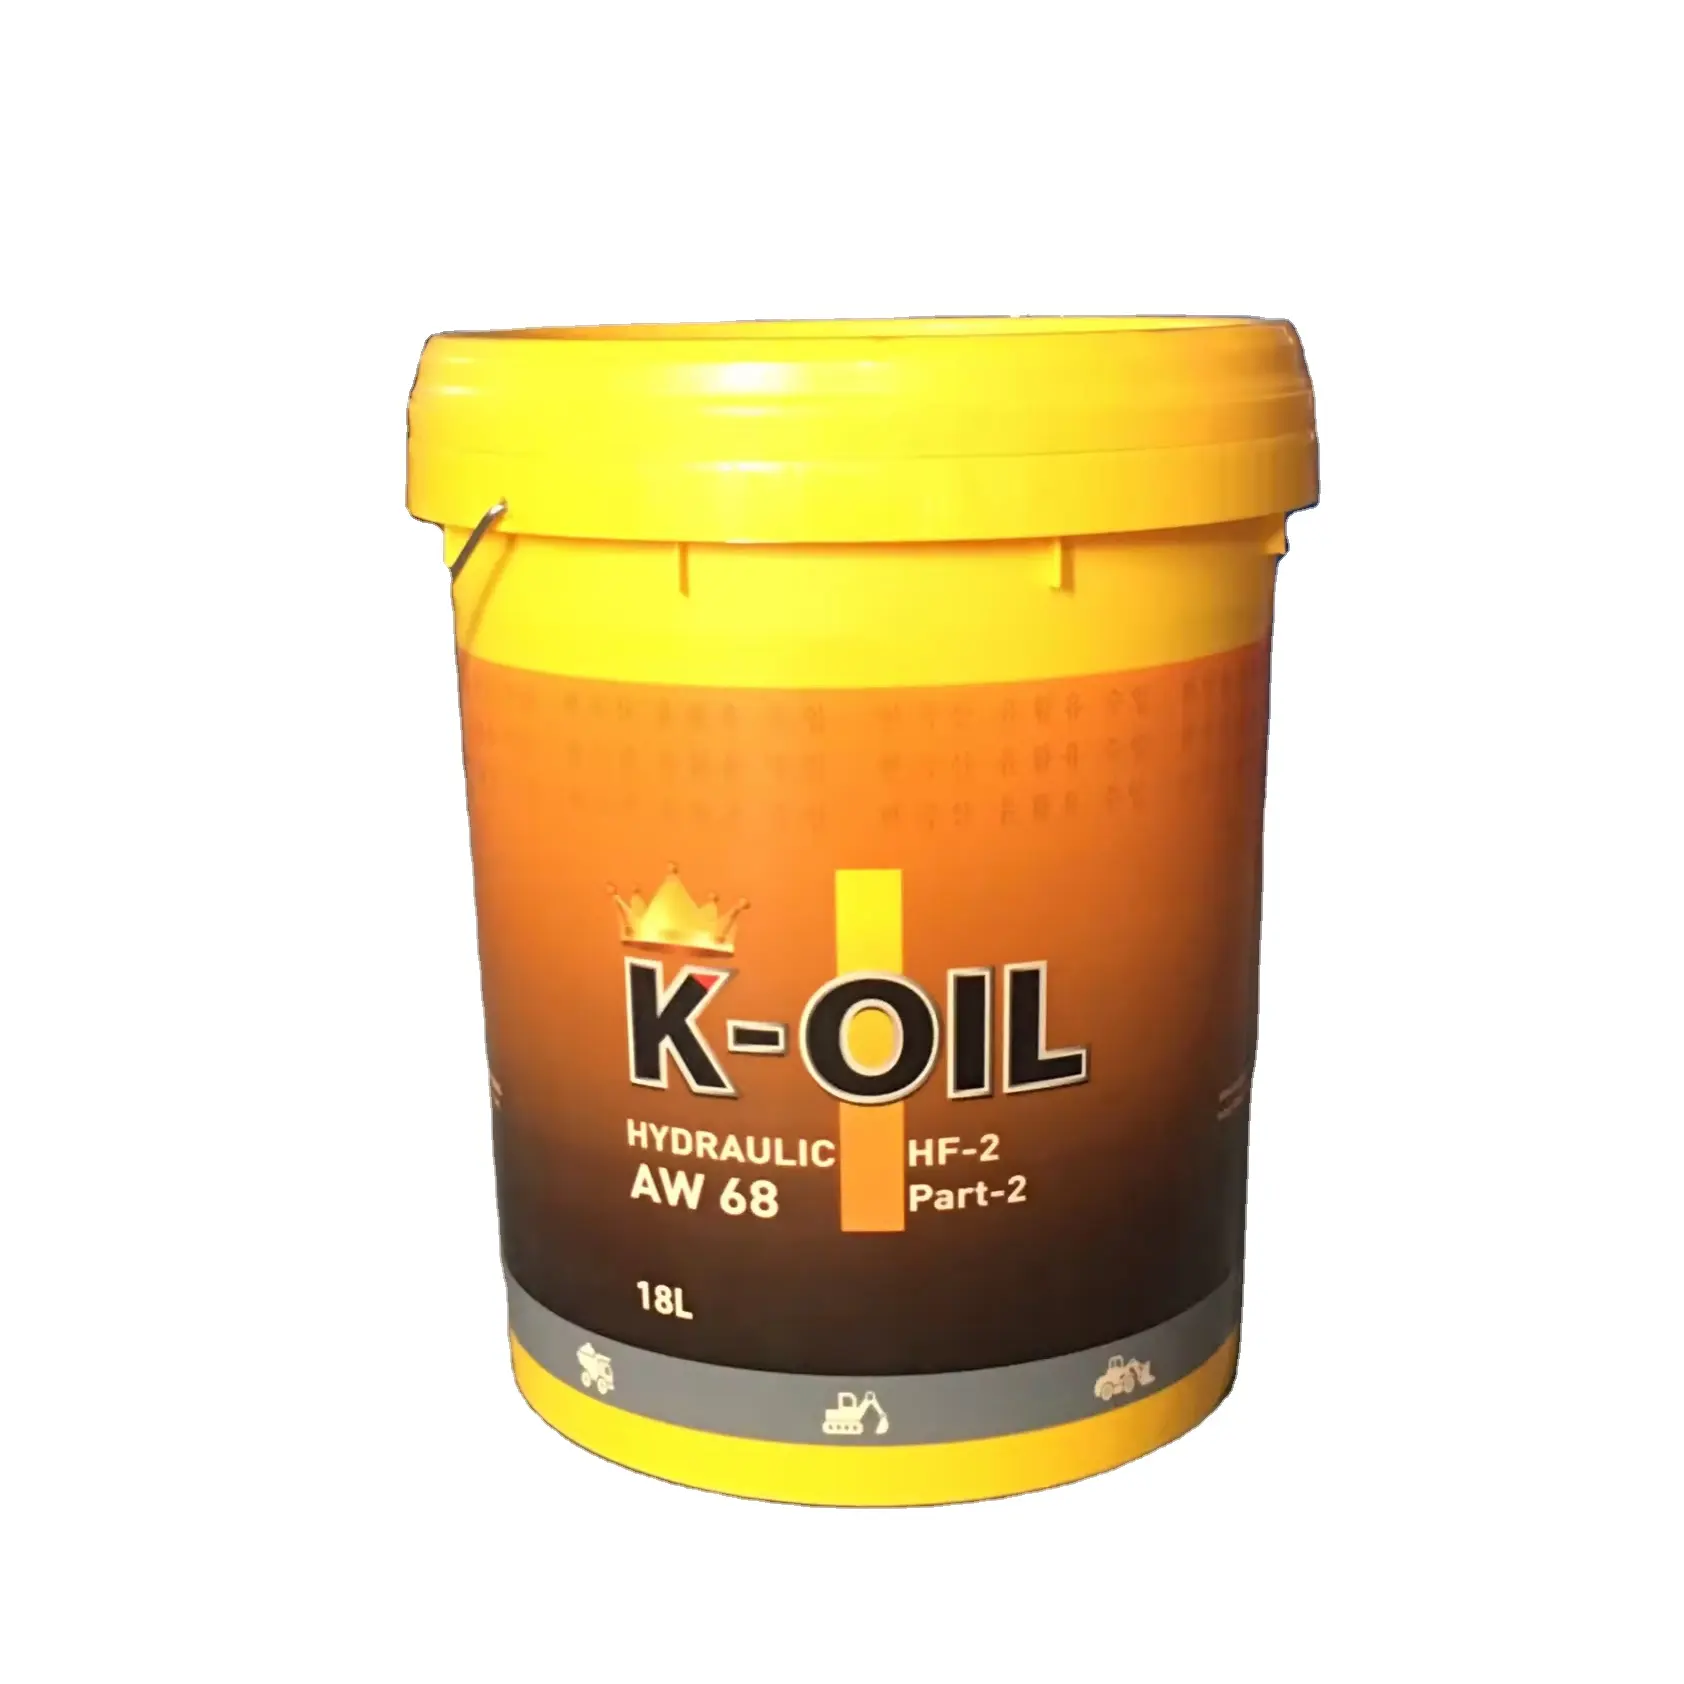 K-oil hydraulic AW68 hydraulic oil multi-level lubricant and low price lubricant for trains, ships Vietnam